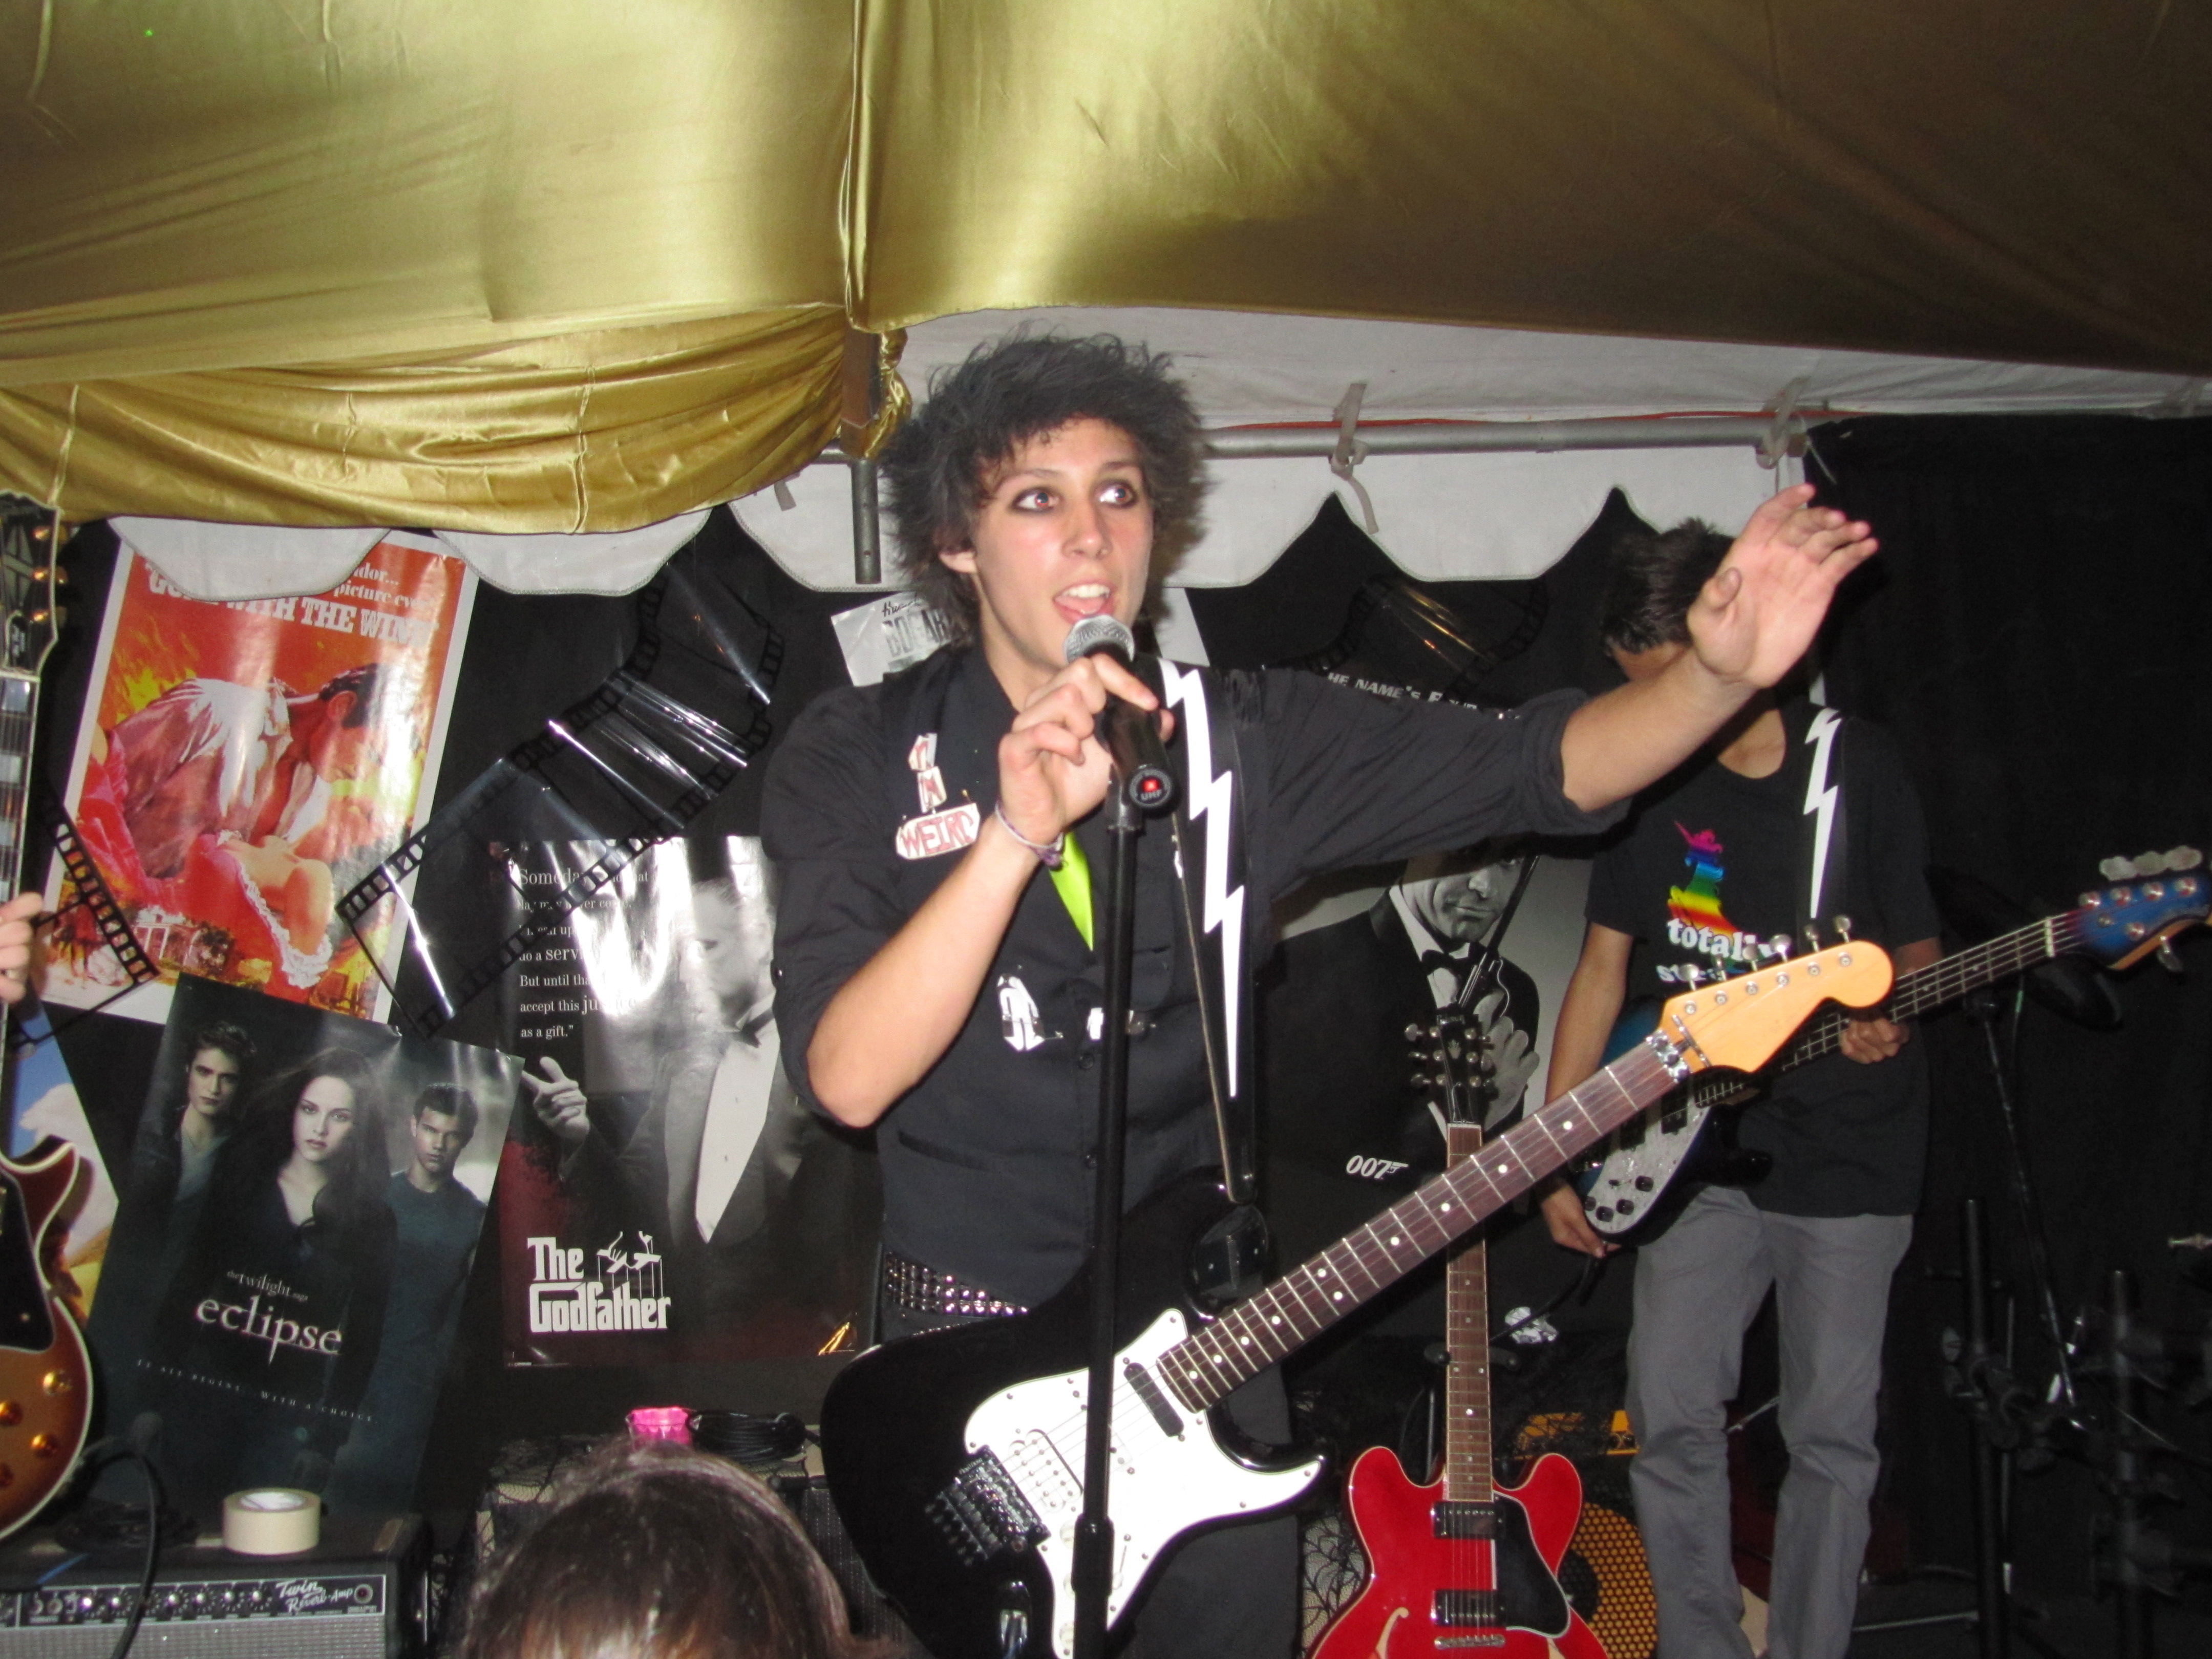 Cameron singing with his band 